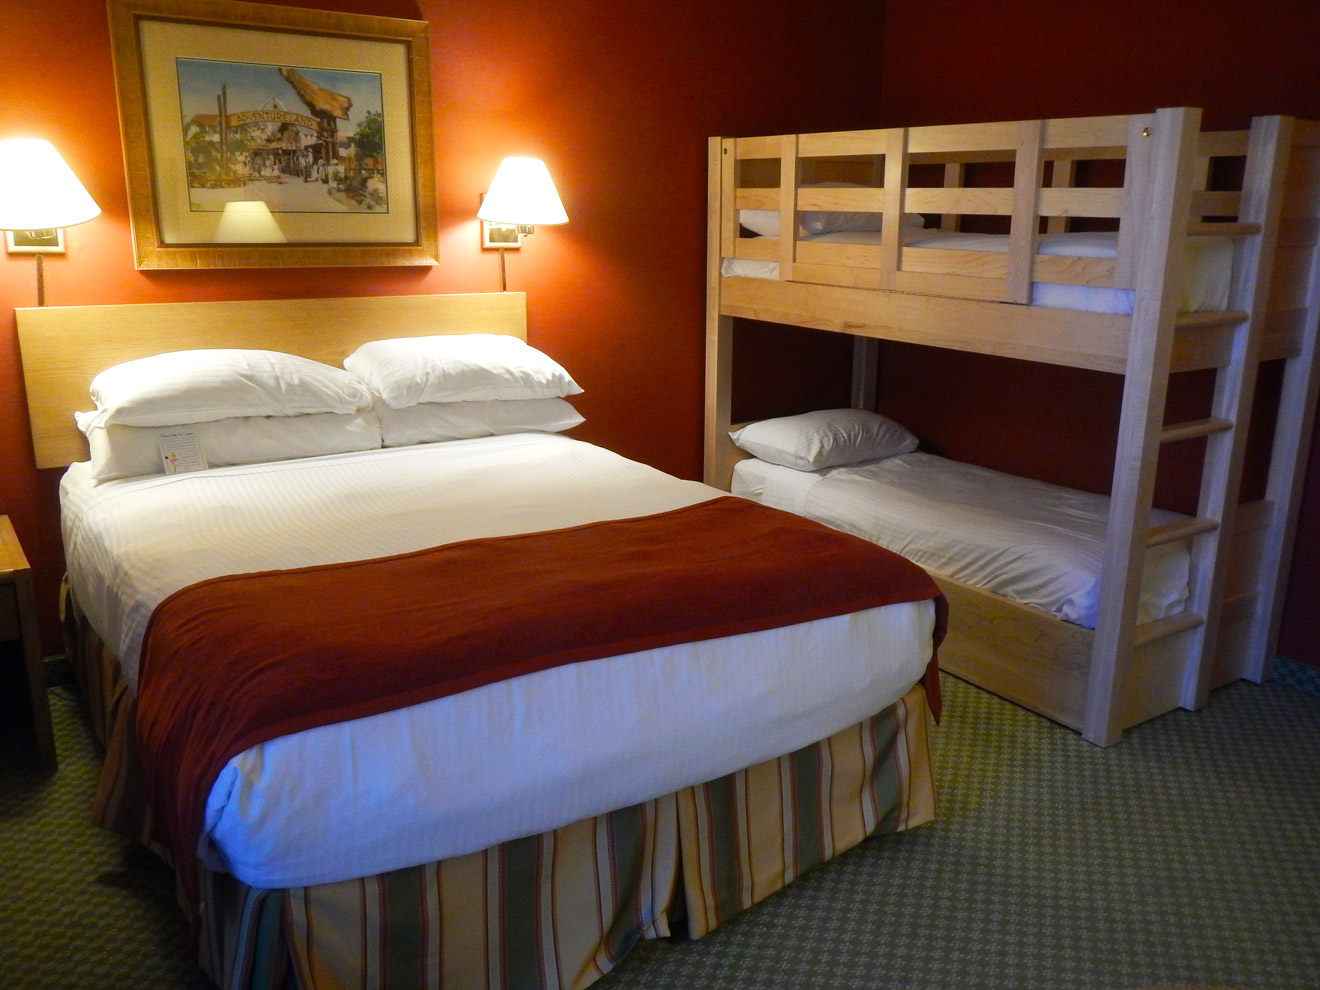 Howard Johnson Anaheim Hotel Is Family, Anaheim Hotels With Bunk Beds